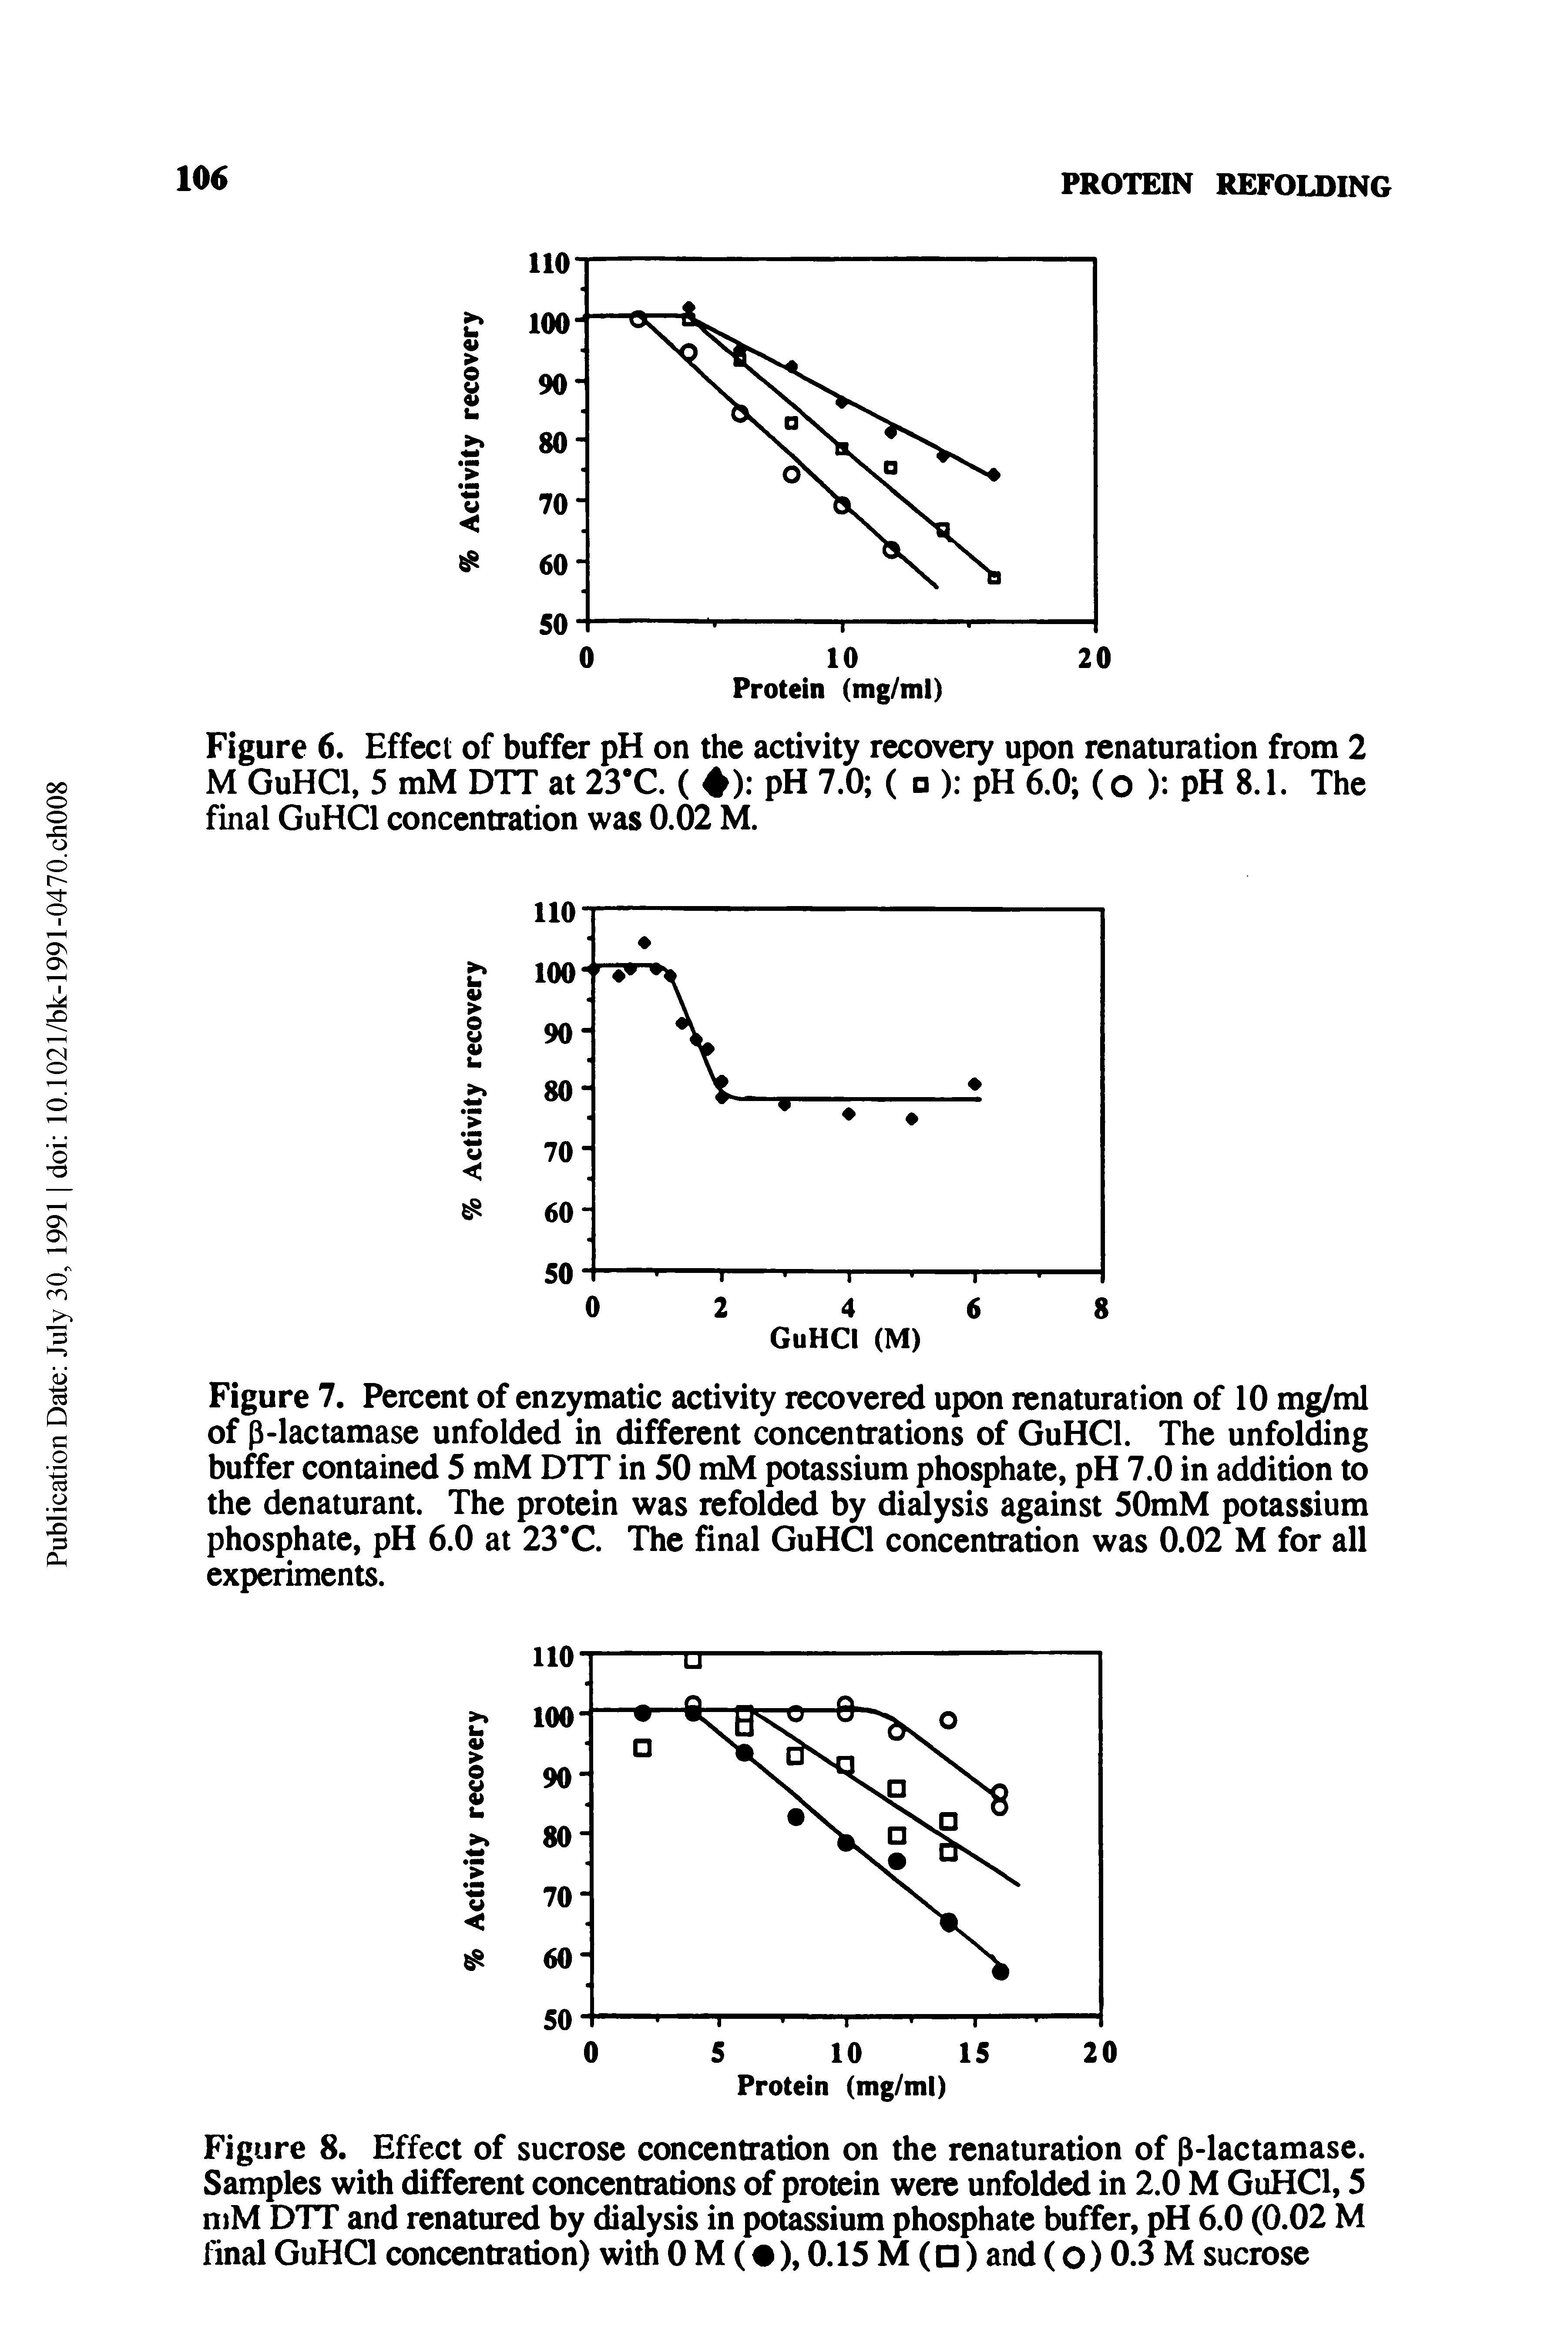 Figure 8. Effect of sucrose concentration on the renaturation of p-lactamase. Samples with different concentrations of protein were unfolded in 2.0 M GuHCl, 5 niM DTT and renatured by dialysis in potassium phosphate buffer, pH 6.0 (0.02 M final GuHCl concentration) with 0 M ( ), 0.15 M ( ) and (o) 0.3 M sucrose...